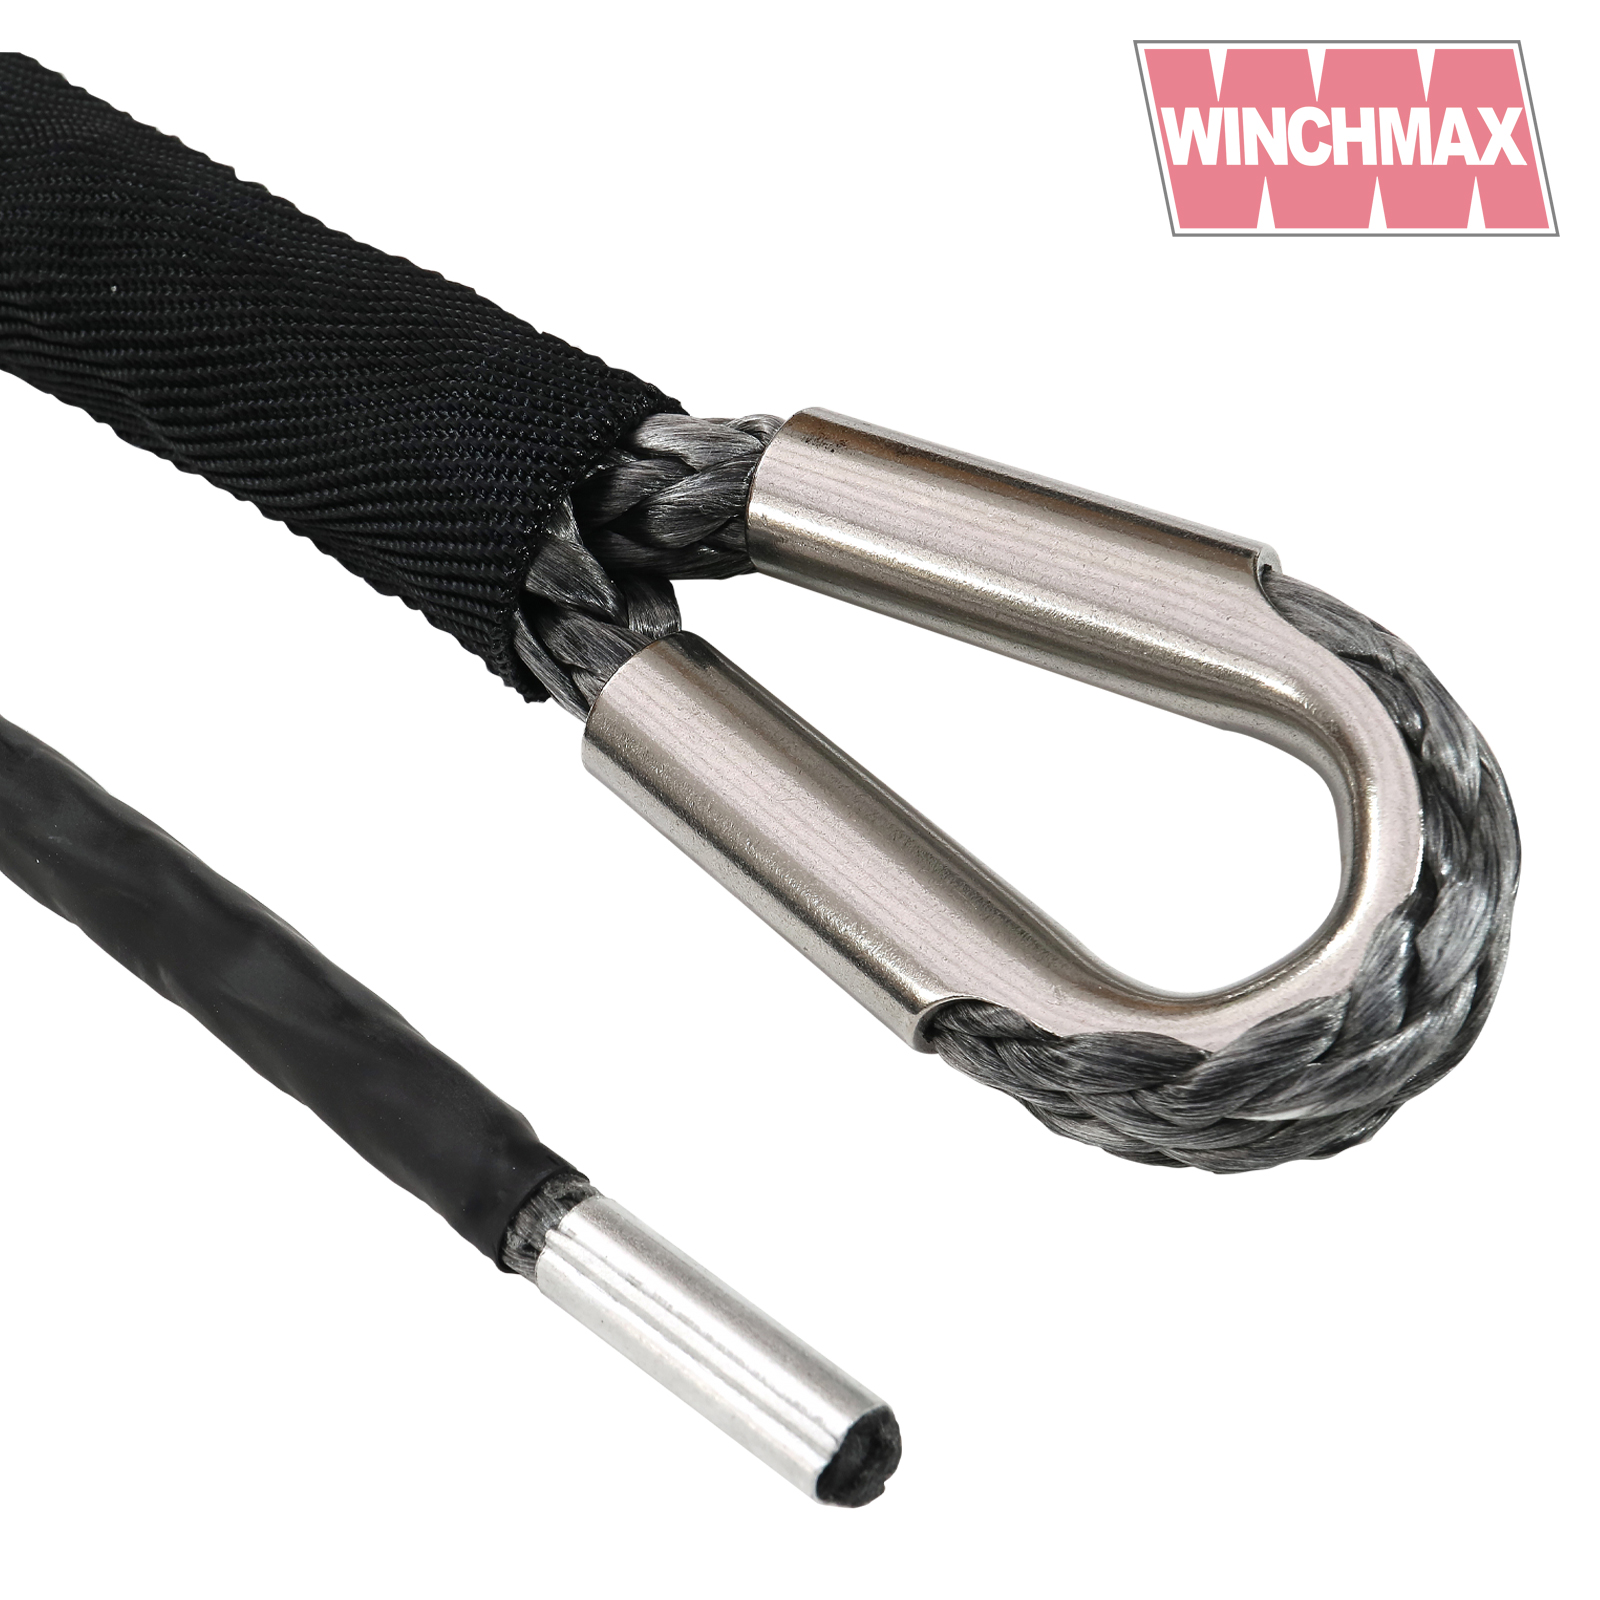 Premium Quality Synthetic Winch Rope 28m x 11mm, Hole Fix. 3/8 Inch  Tactical Hook. - Winchmax